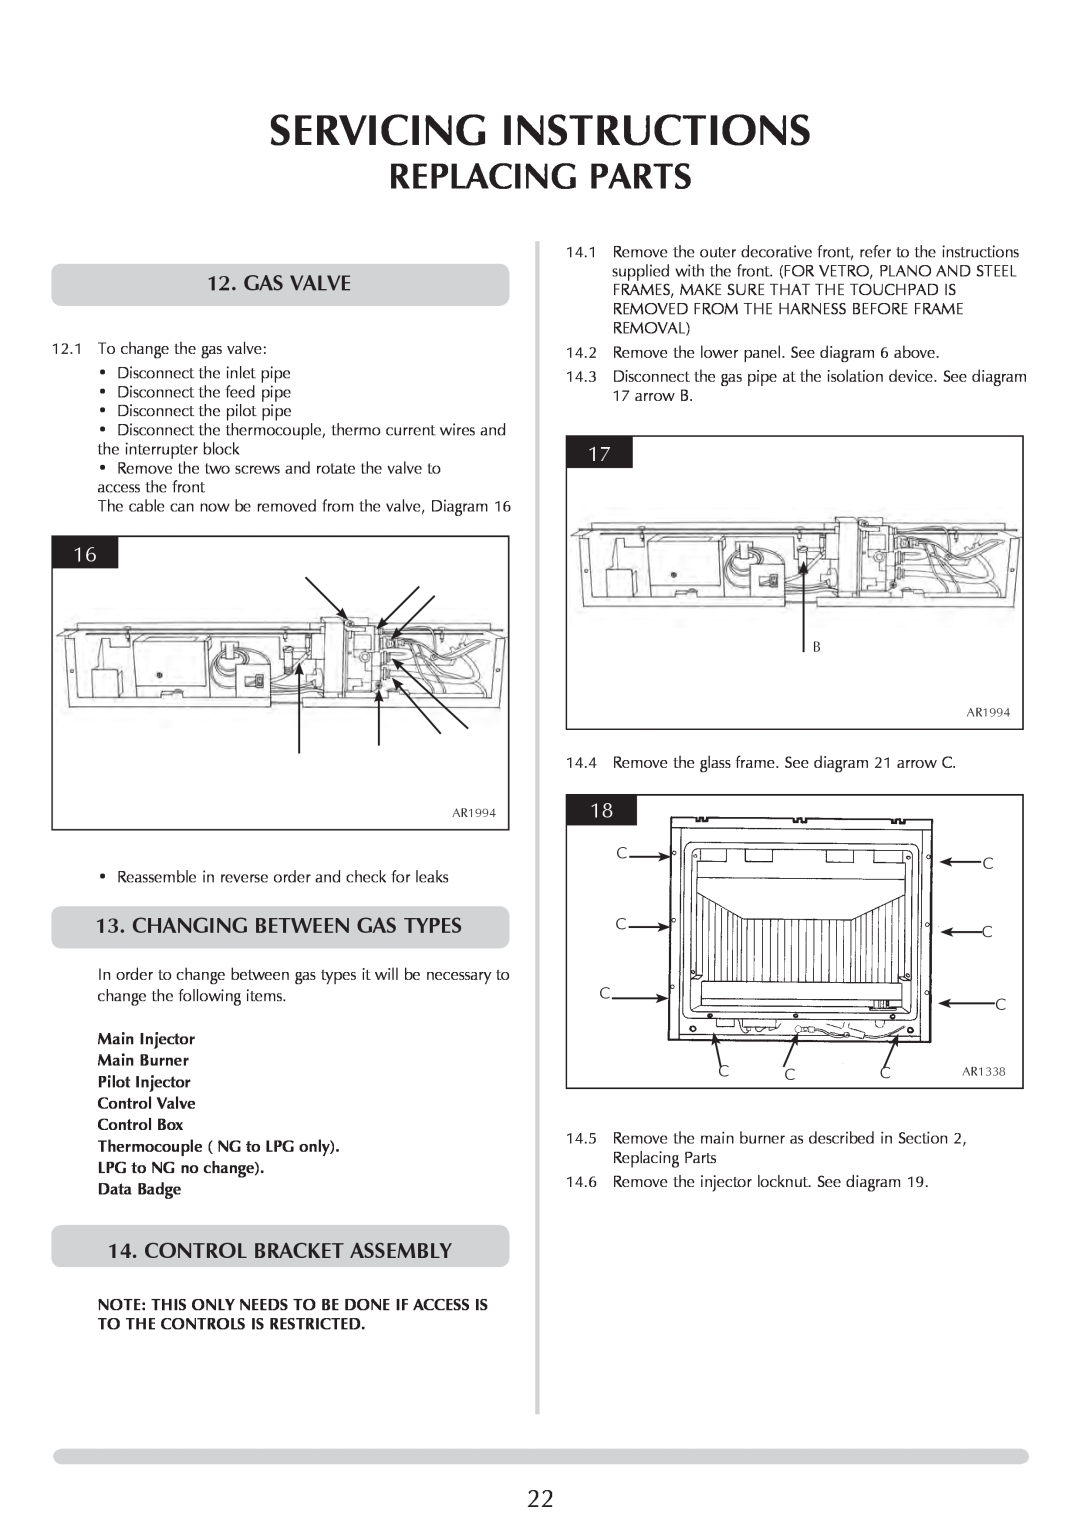 Stovax PR0731 Servicing Instructions, Replacing Parts, gas VALVE, Changing Between Gas Types, control bracket assembly 